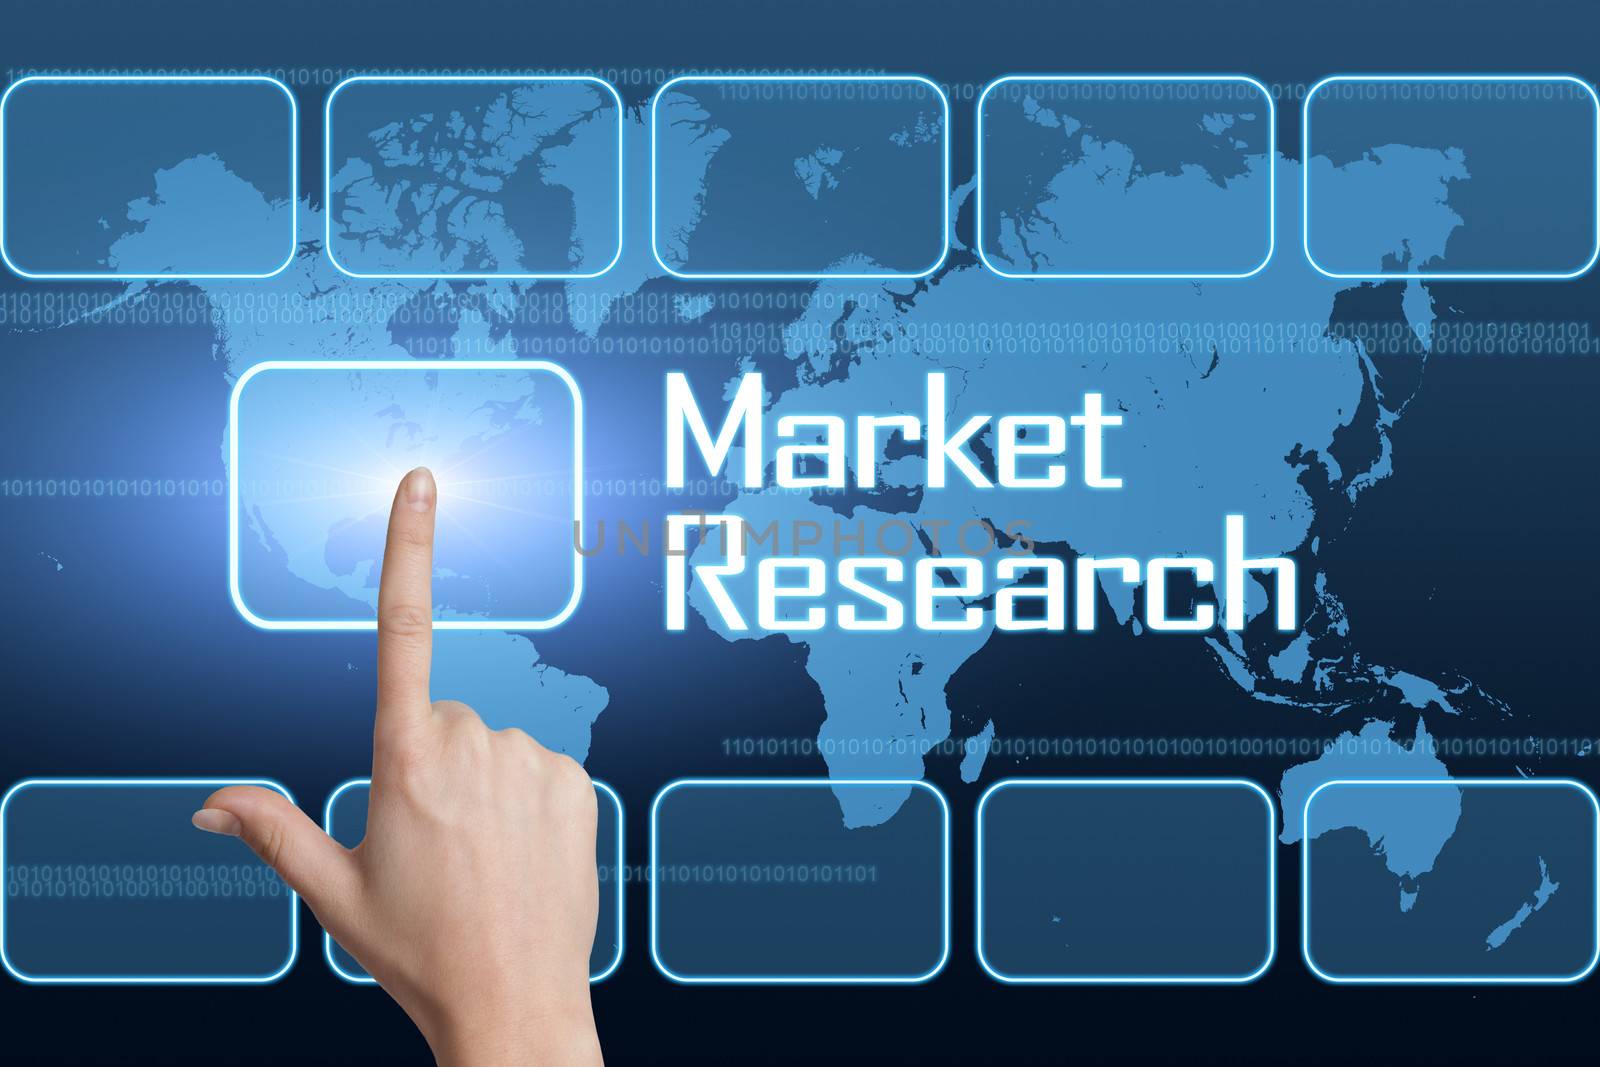 Market Research concept with interface and world map on blue background